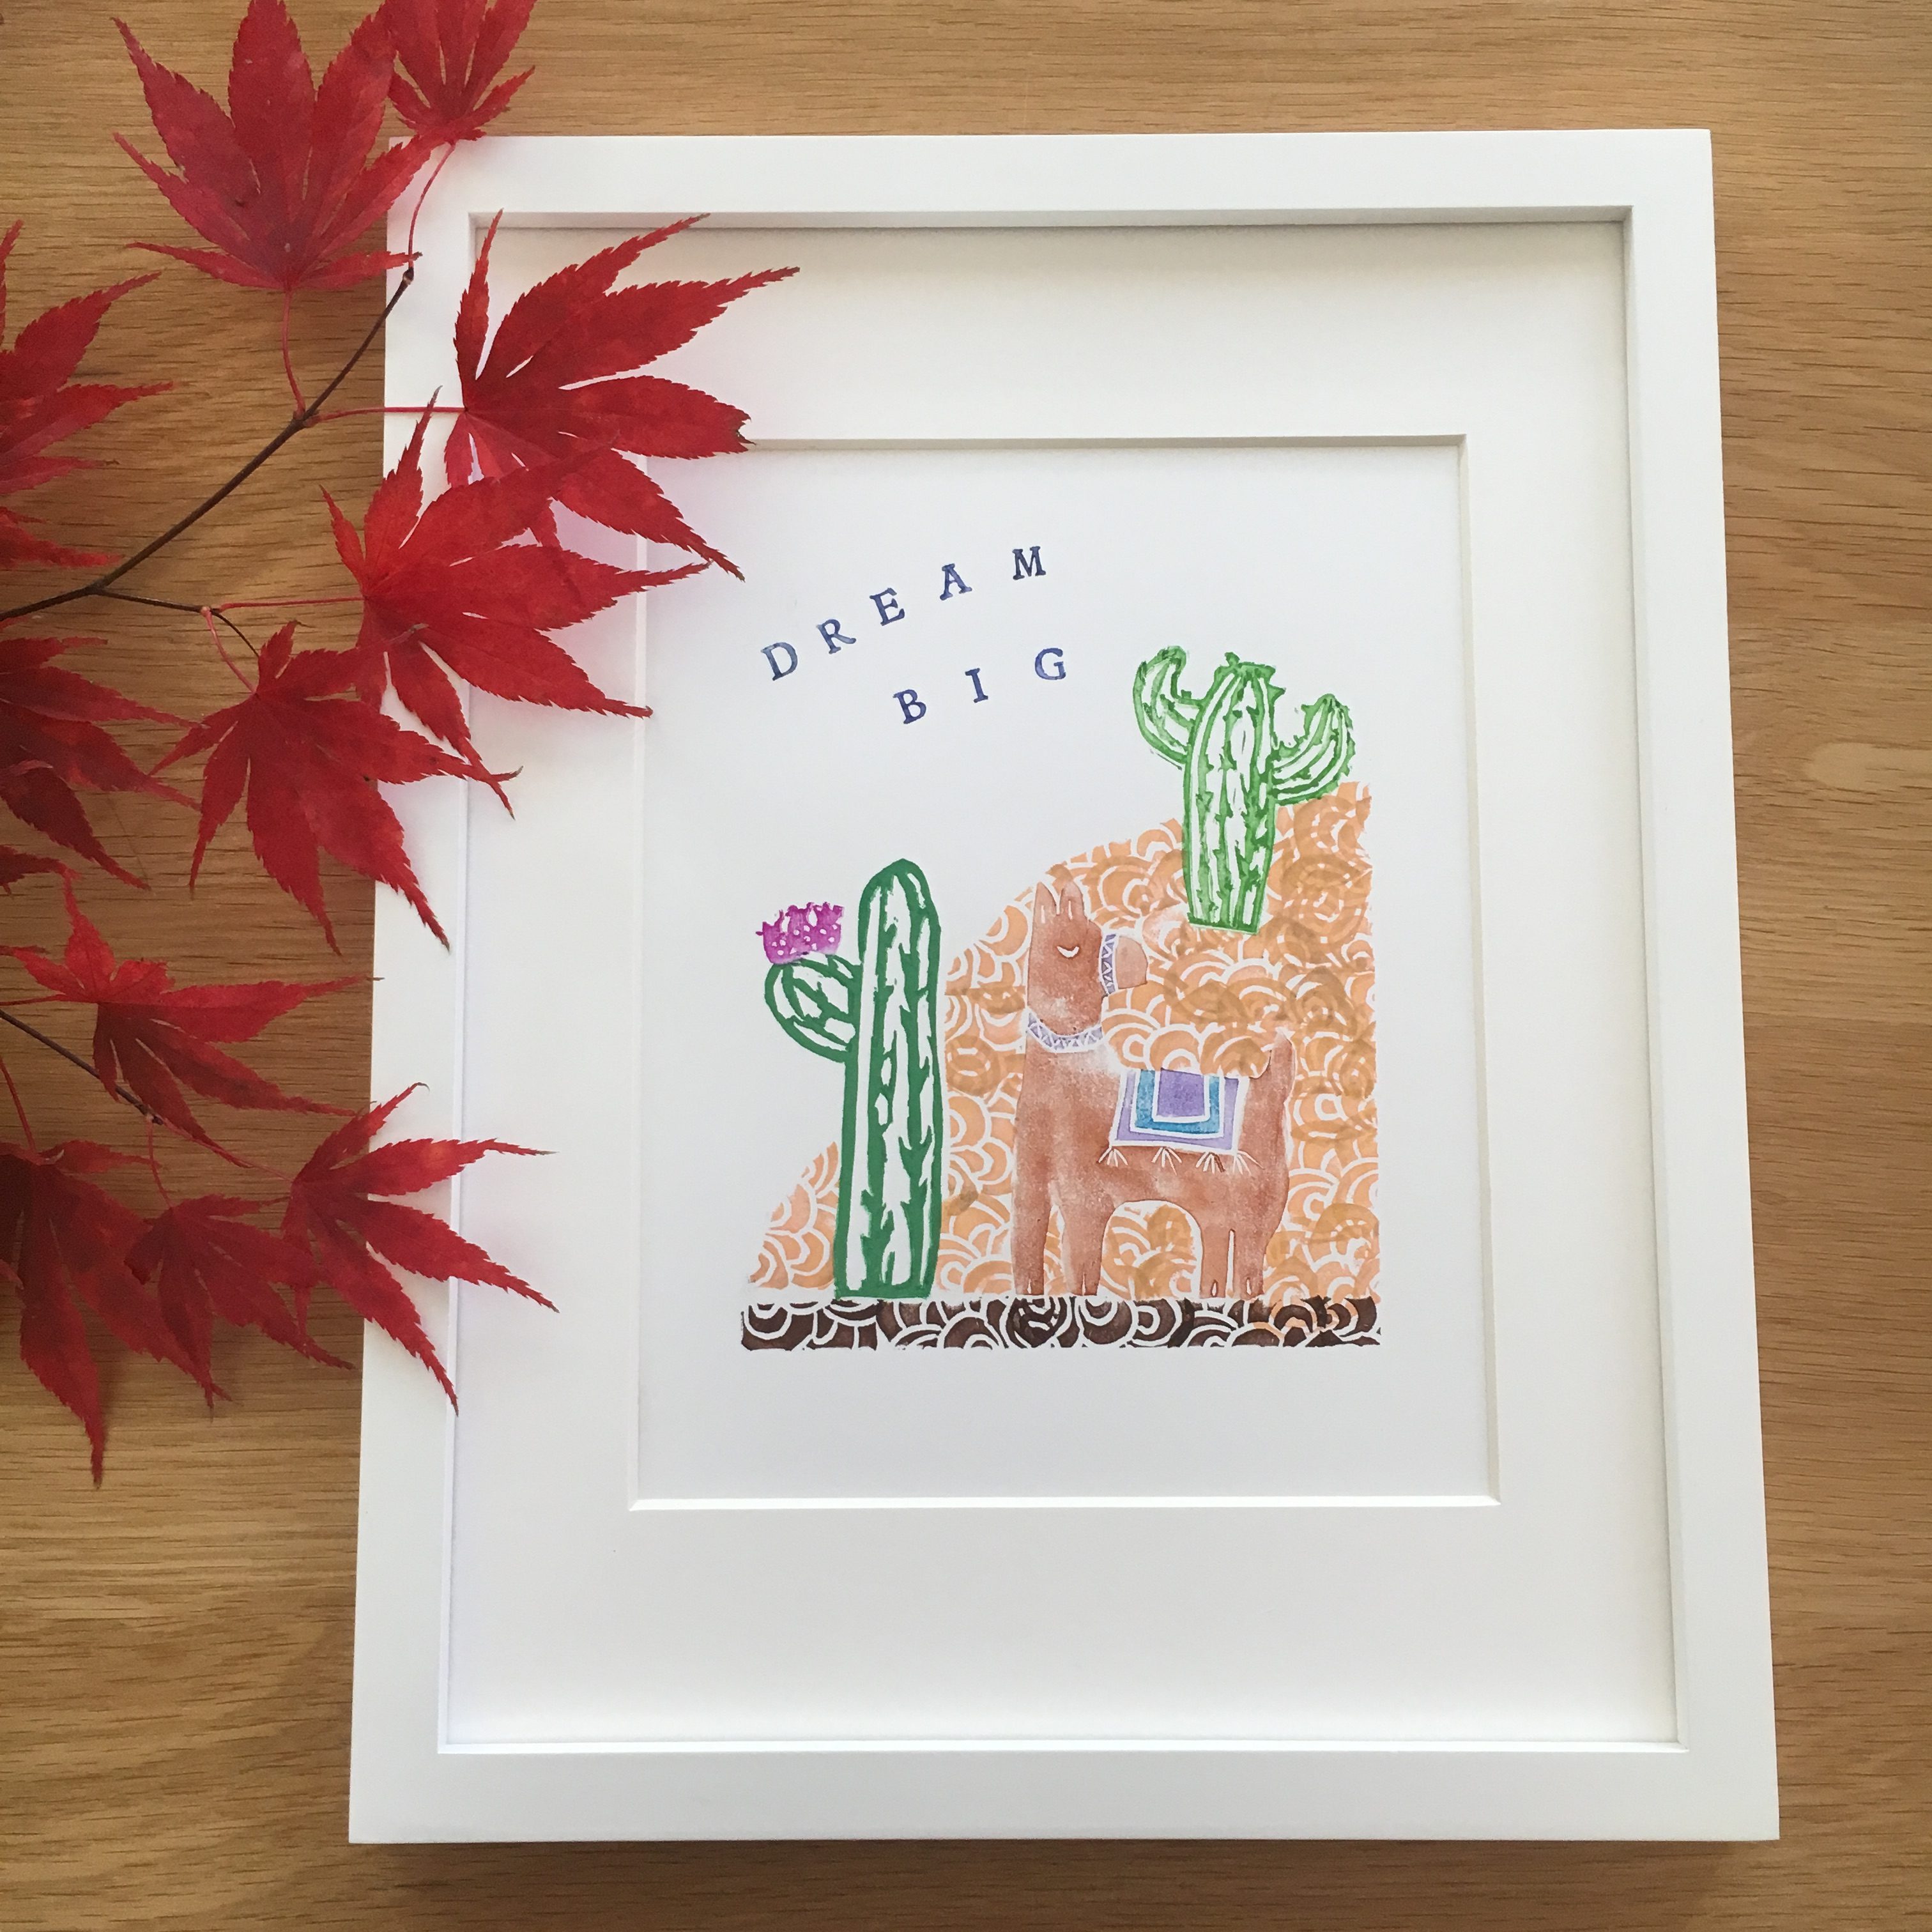 Hand carved stamp collage - cacti and llama landscape - inspiration by My Stamped World